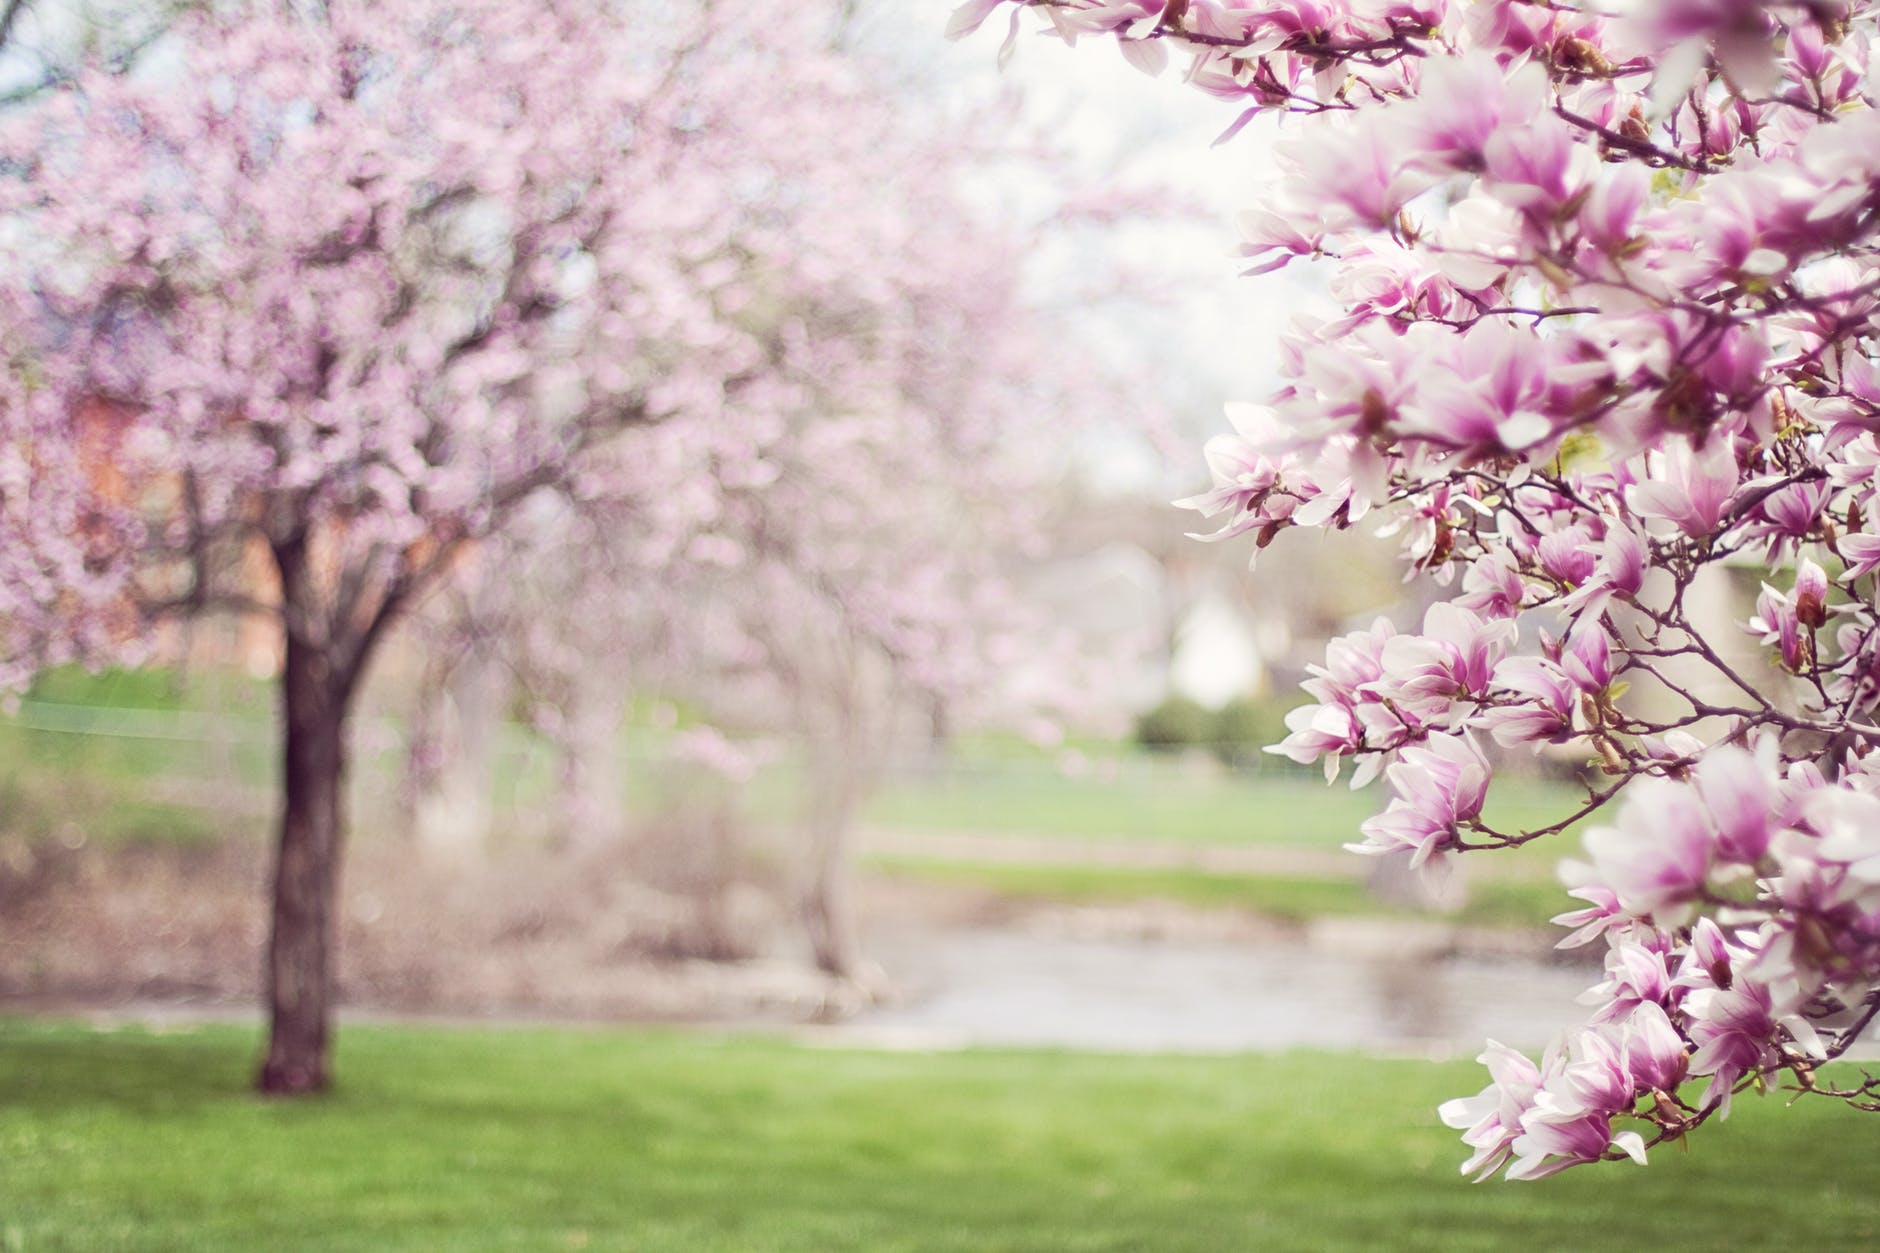 find a nice blossoming tree in your garden, that can brighten the space up a little.